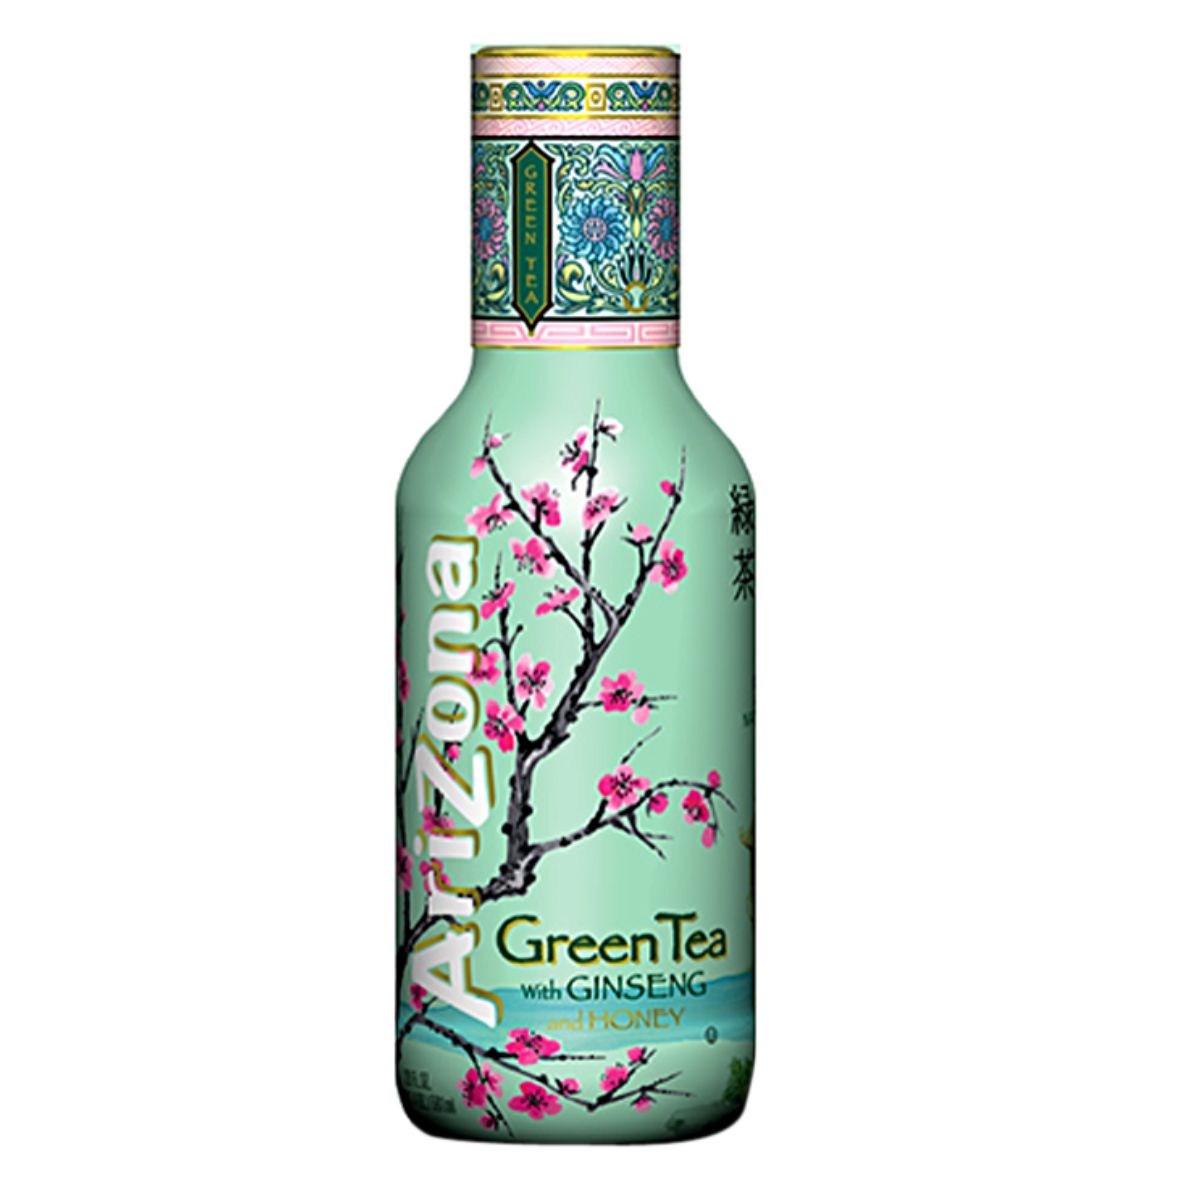 A bottle of Arizona - Iced Green Tea with Honey - 500ml on a white background.